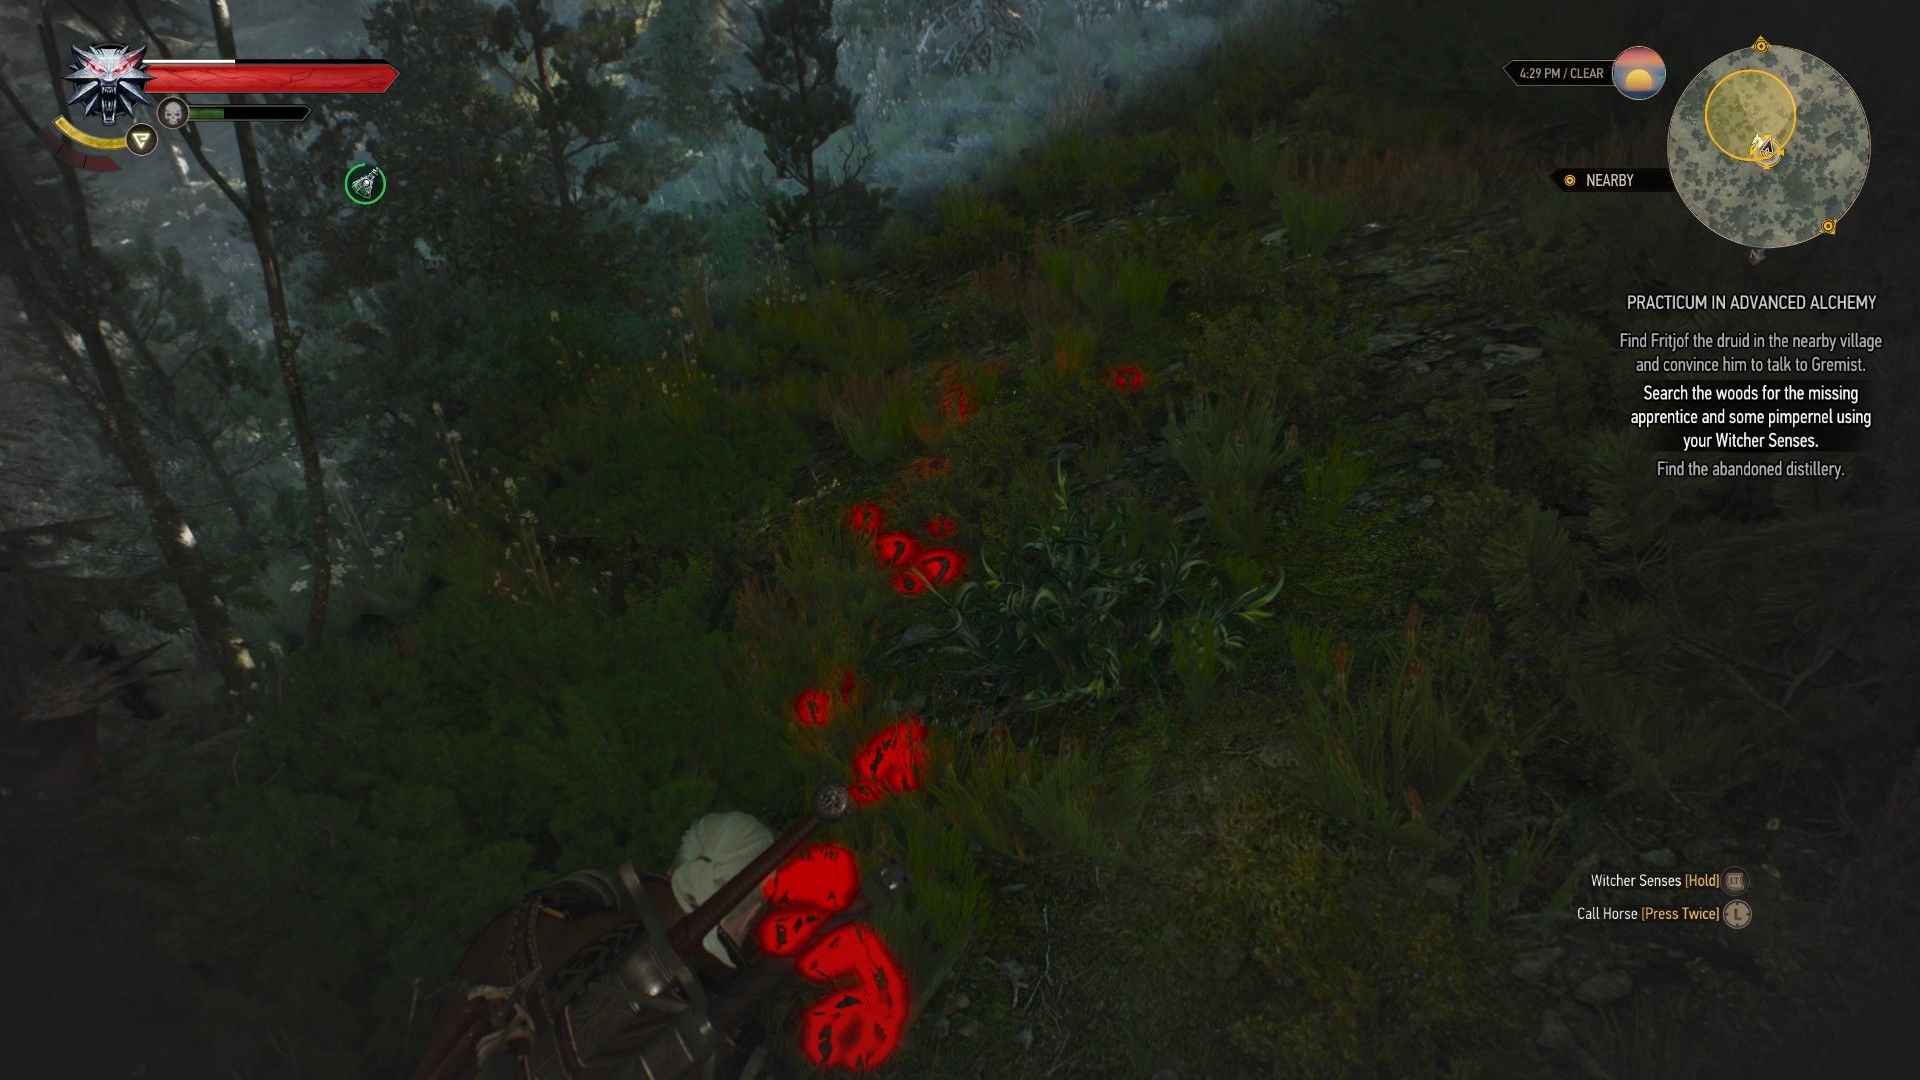 Geralt's Witcher Senses highlight a series of footprints that lead to monsters.